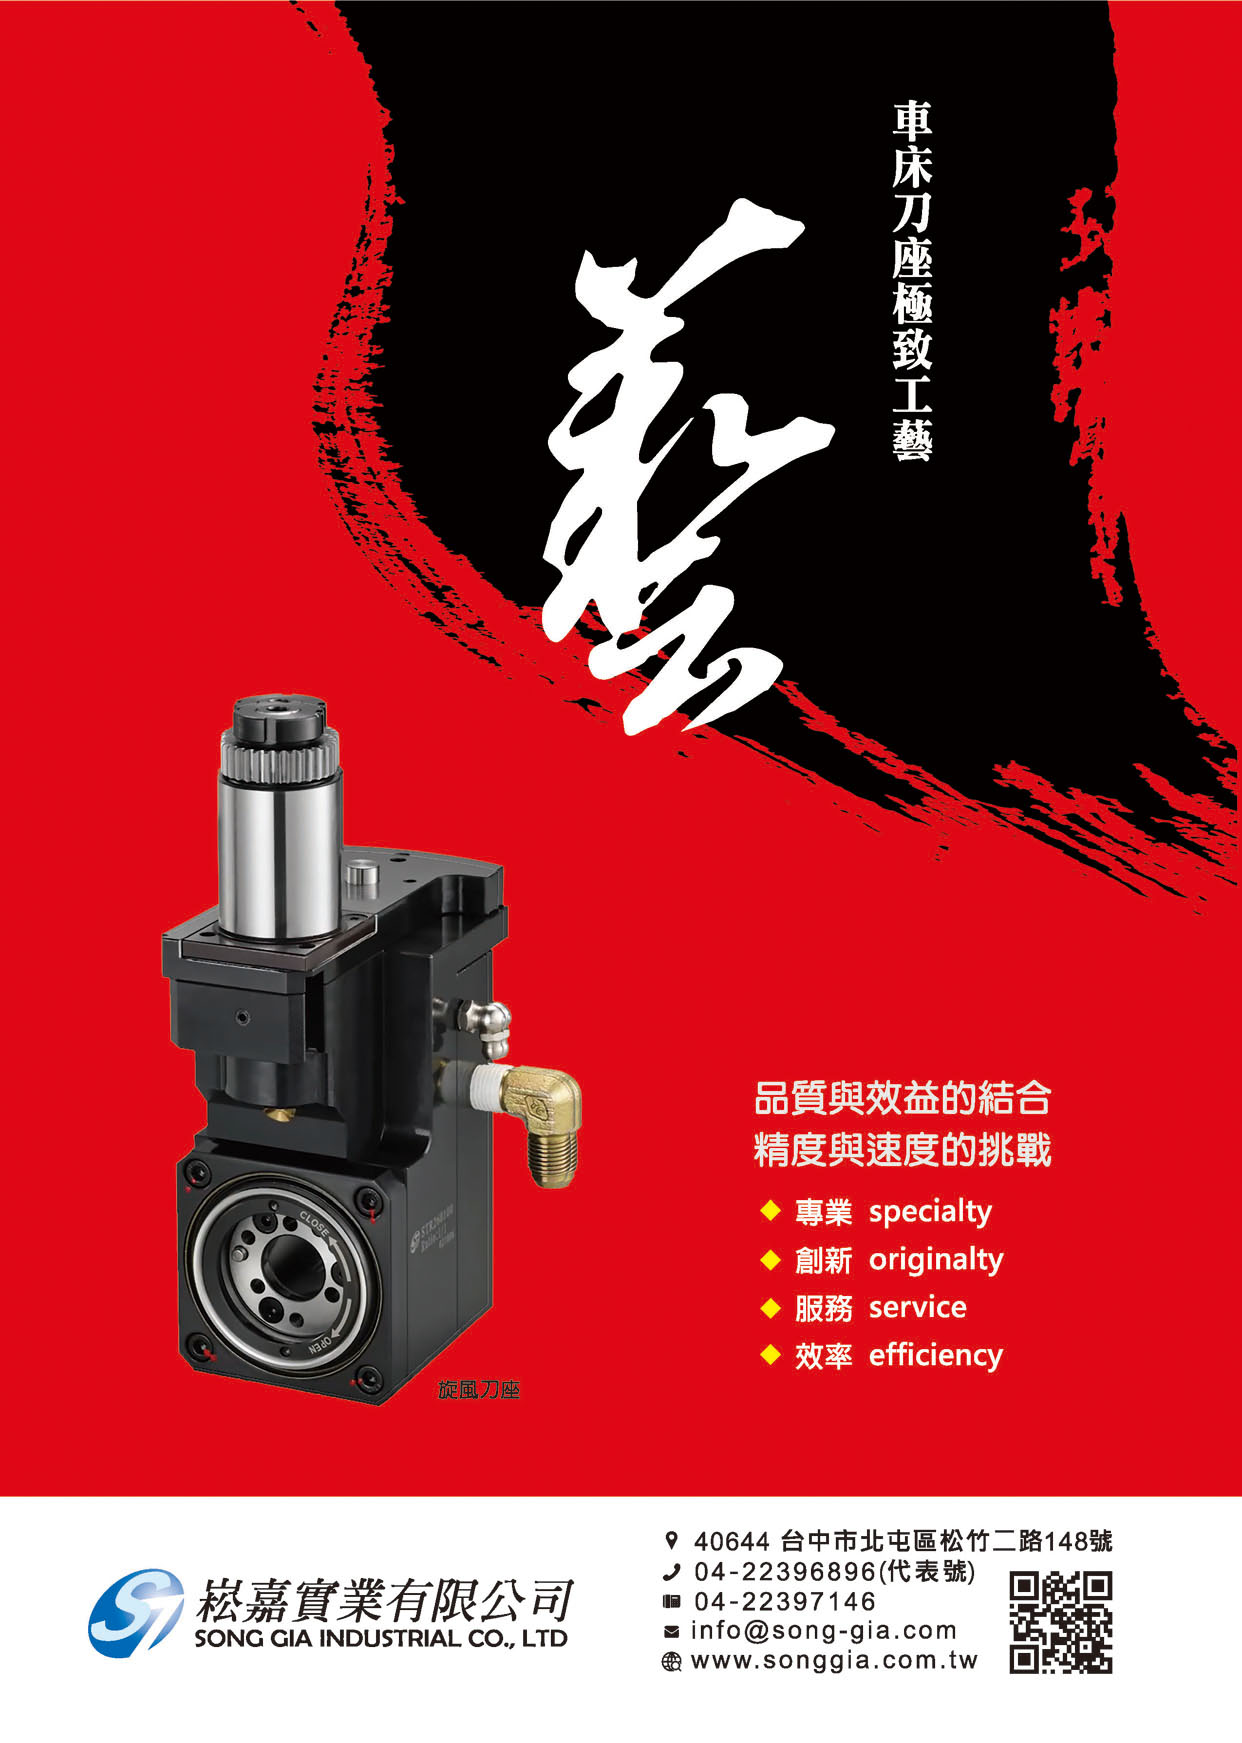 Who Makes Machinery in Taiwan (Chinese) SONG GIA INDUSTRIAL CO., LTD.